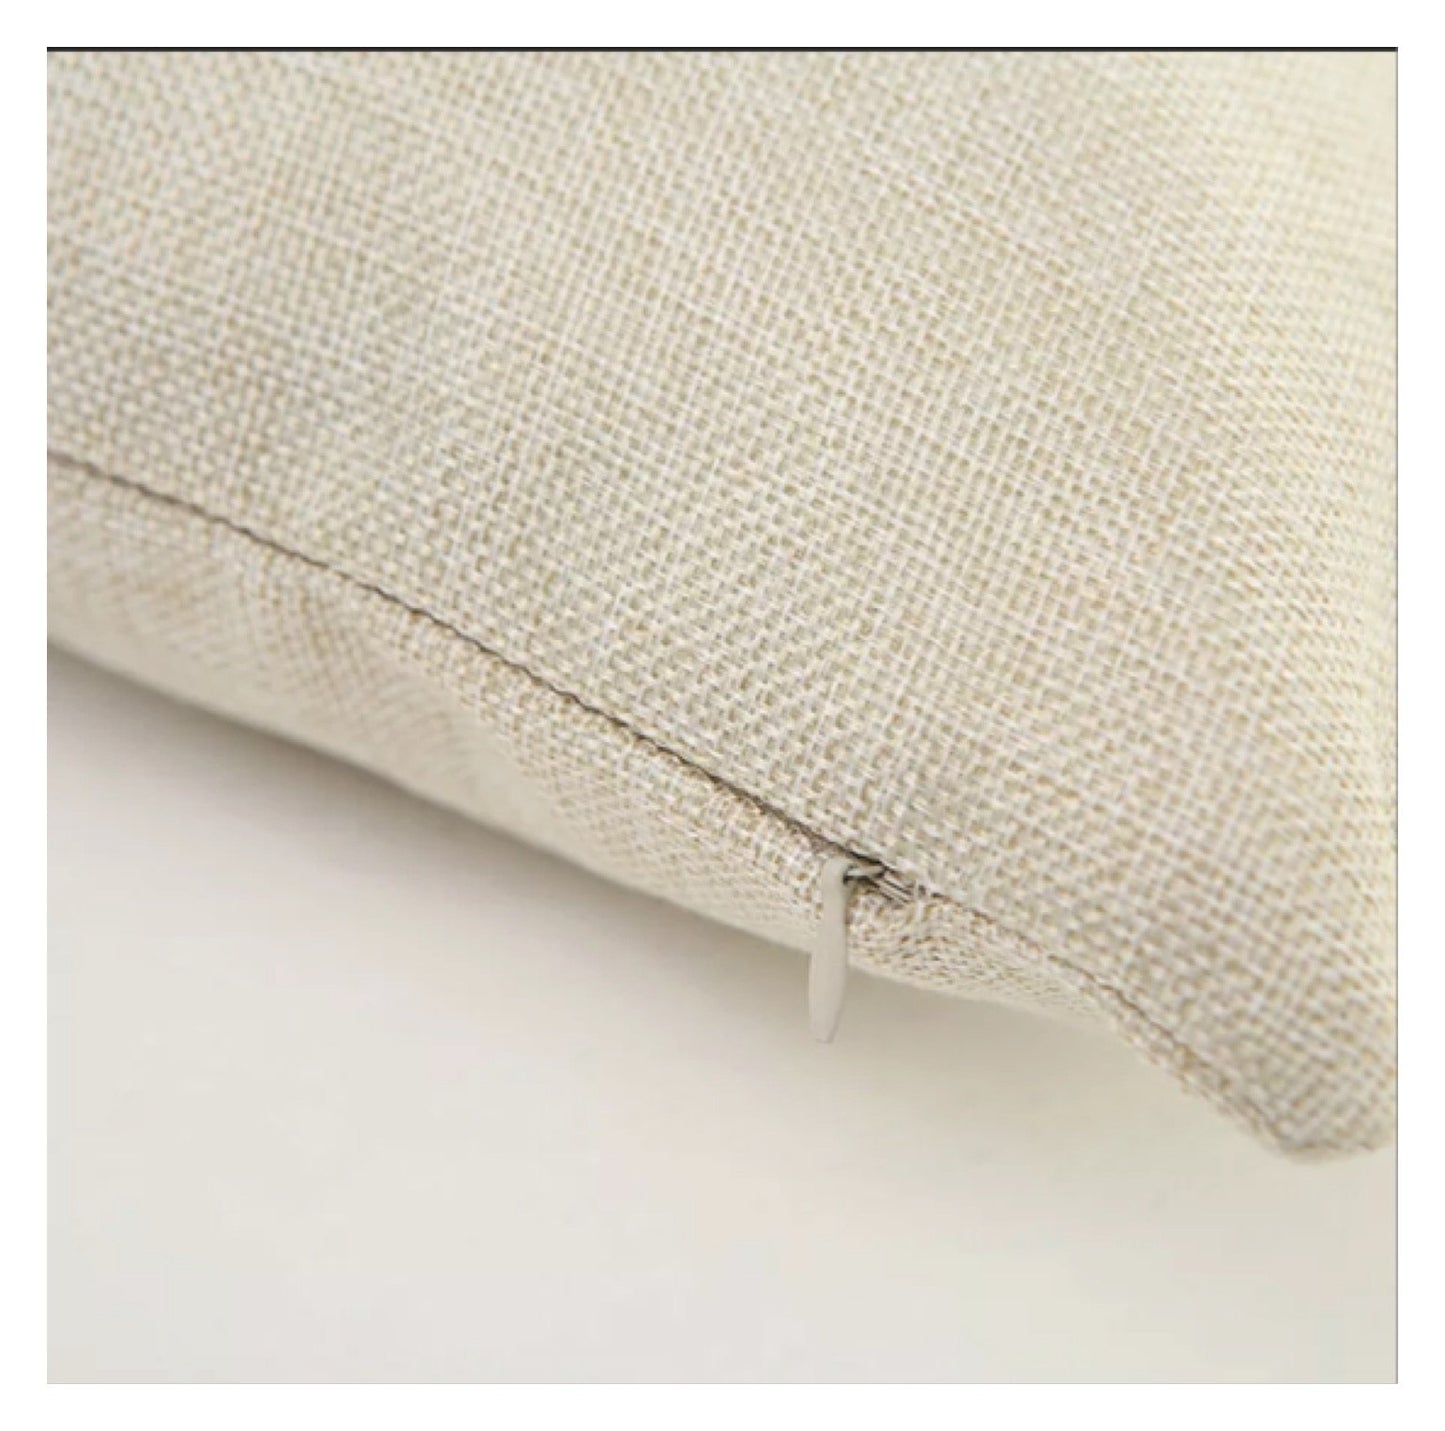 Cushion Grasshopper - The Renmy Store Homewares & Gifts 